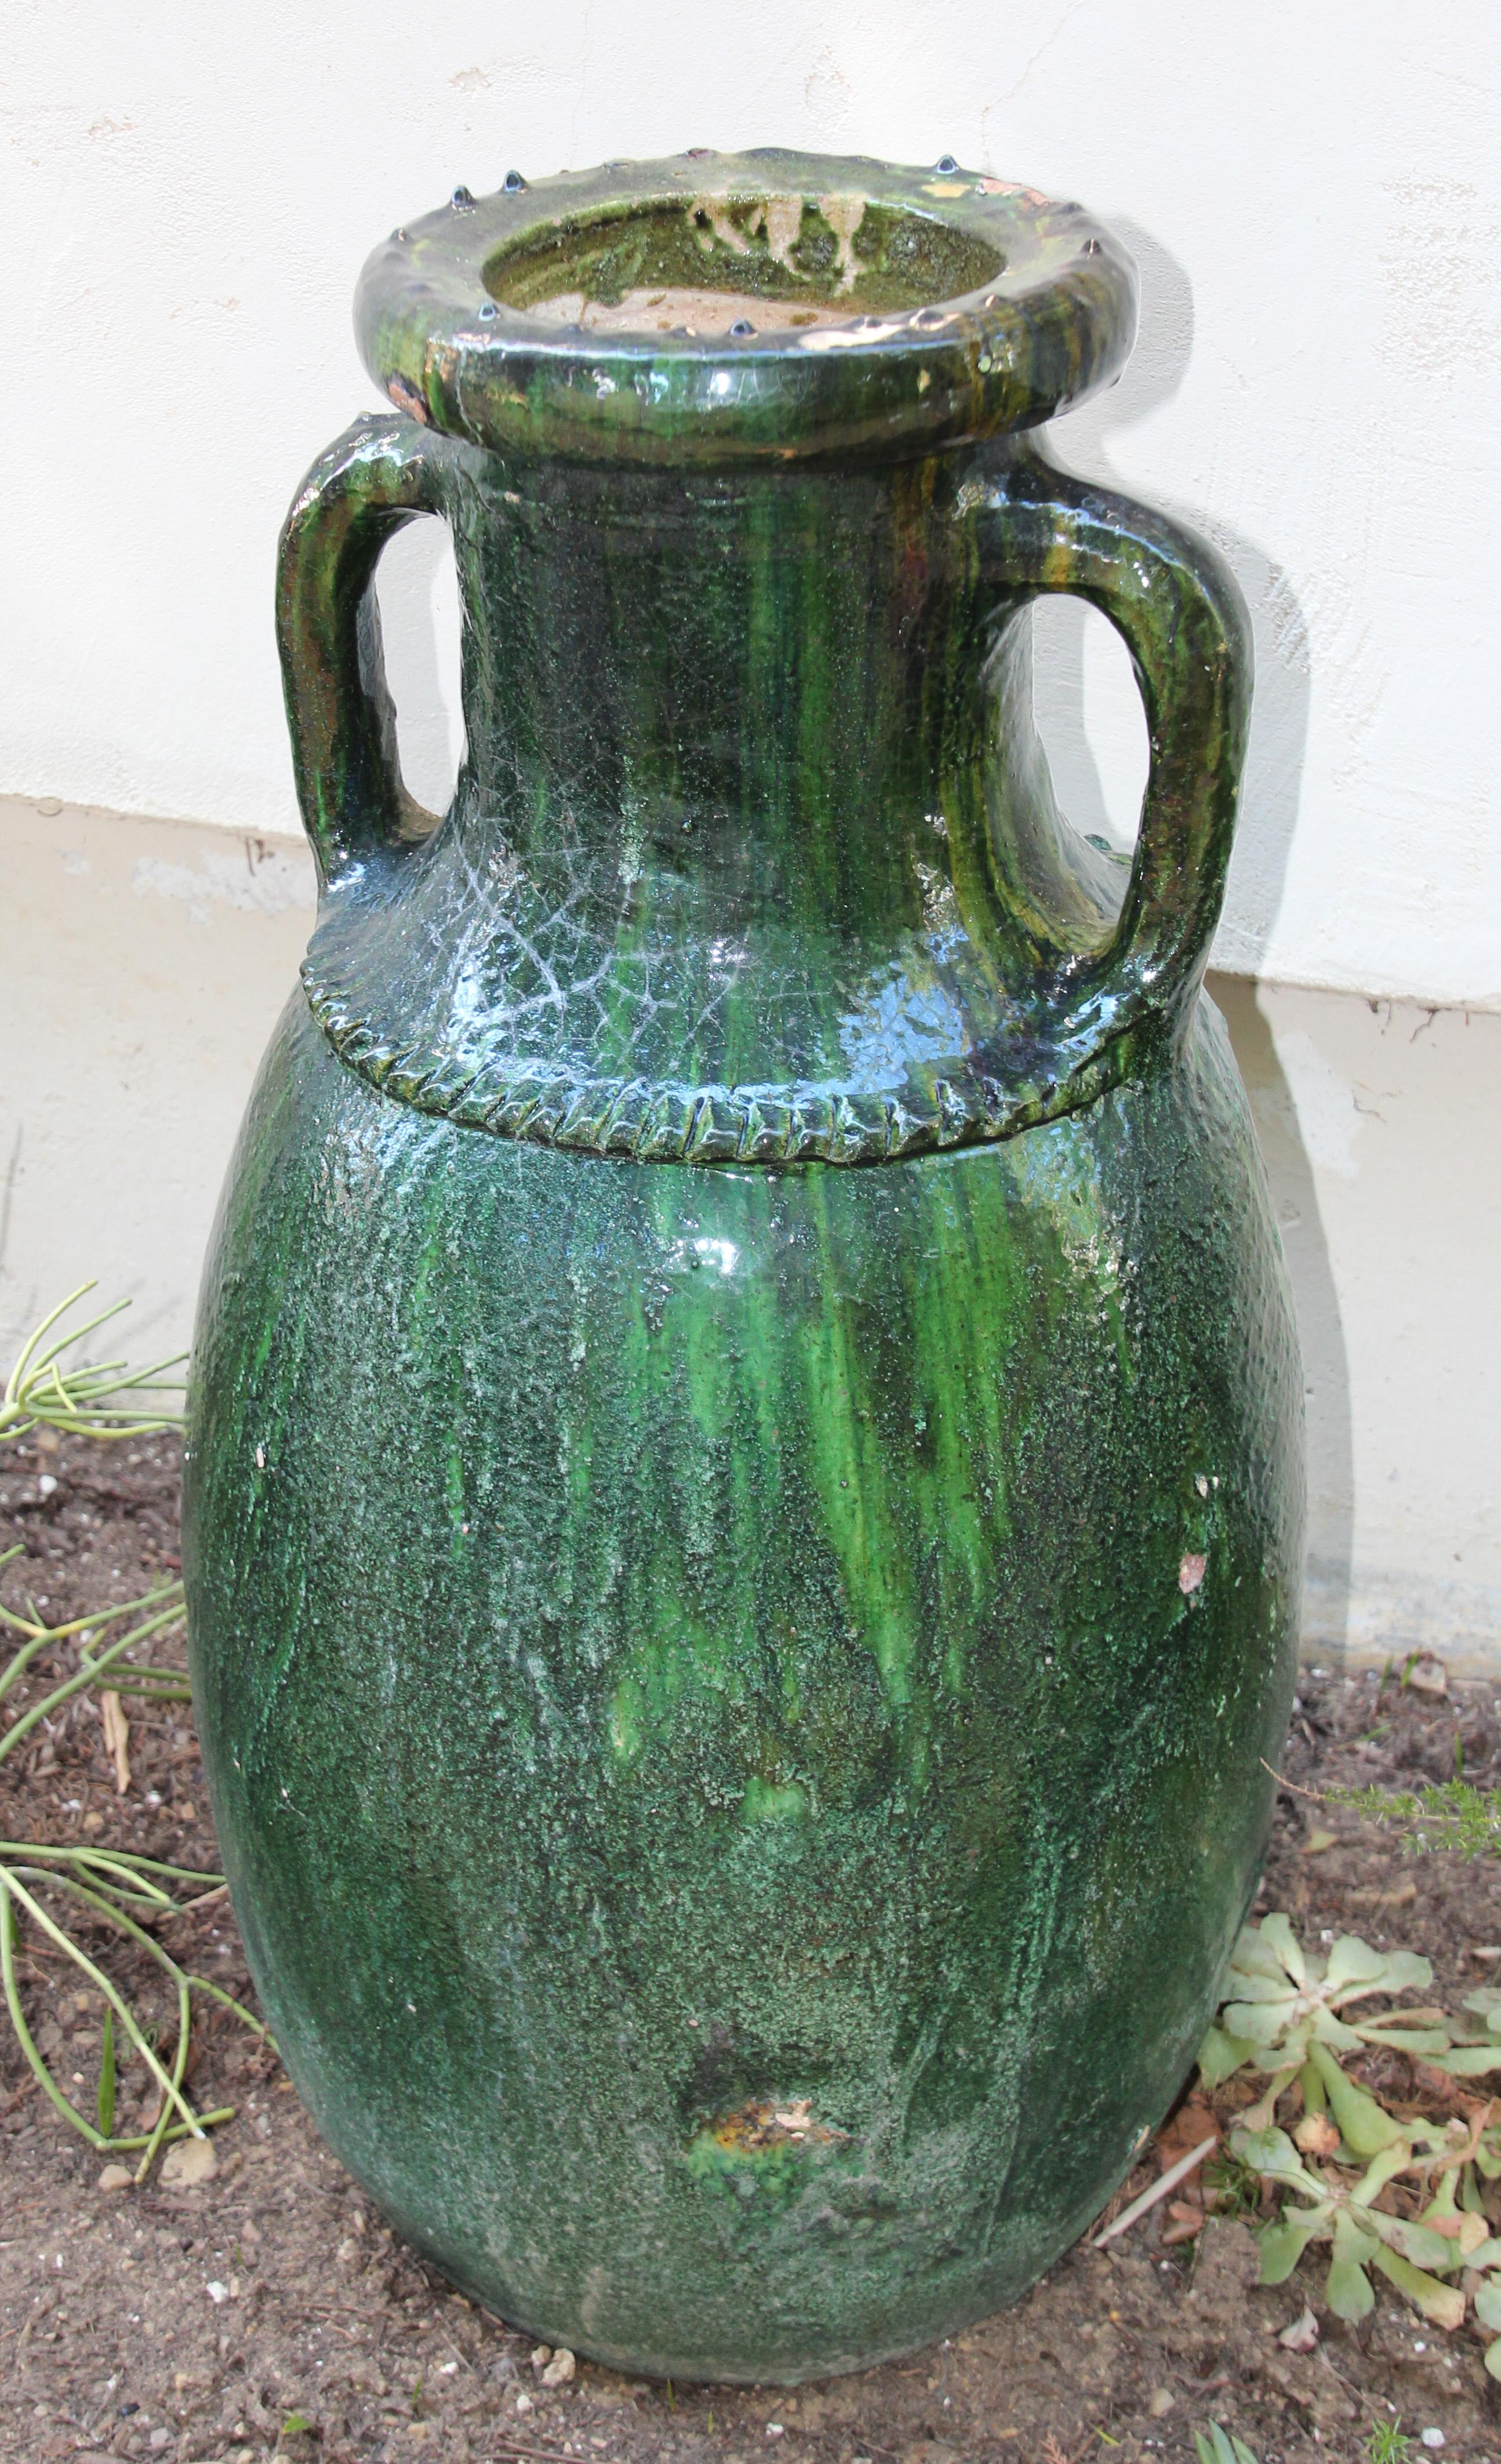 Moroccan Tamgroute vintage, 1960's green olive jar with handles, or planter.
Handcrafted by the Berber people in Tamgroute Morocco.
Great glazed earthenware with different hues of green and black.
A pair is available, slightly different